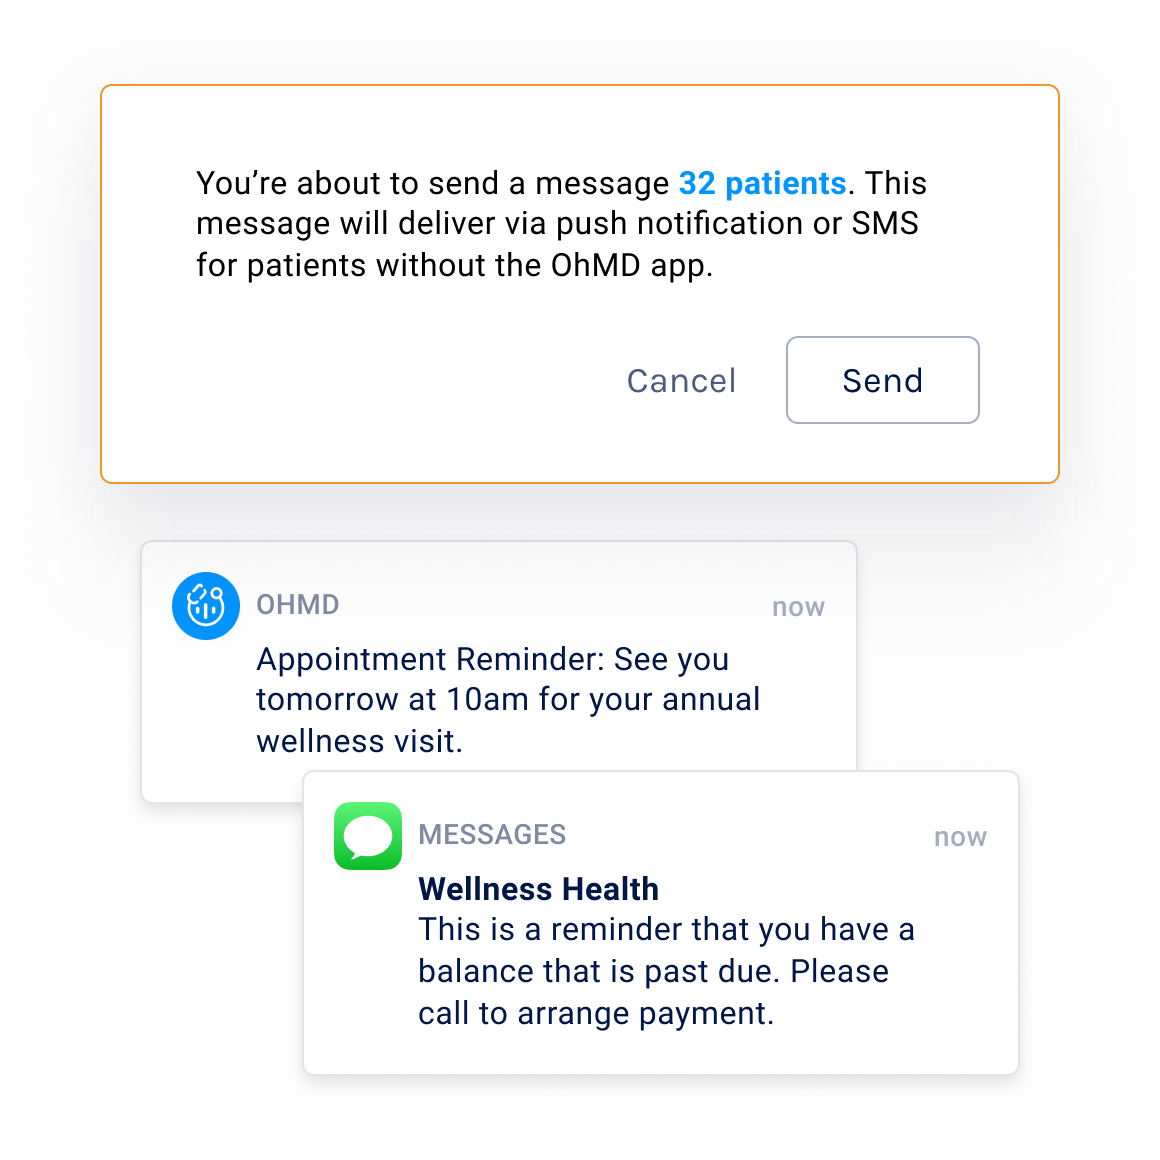 Compliant SMS and HIPAA text messages for patients